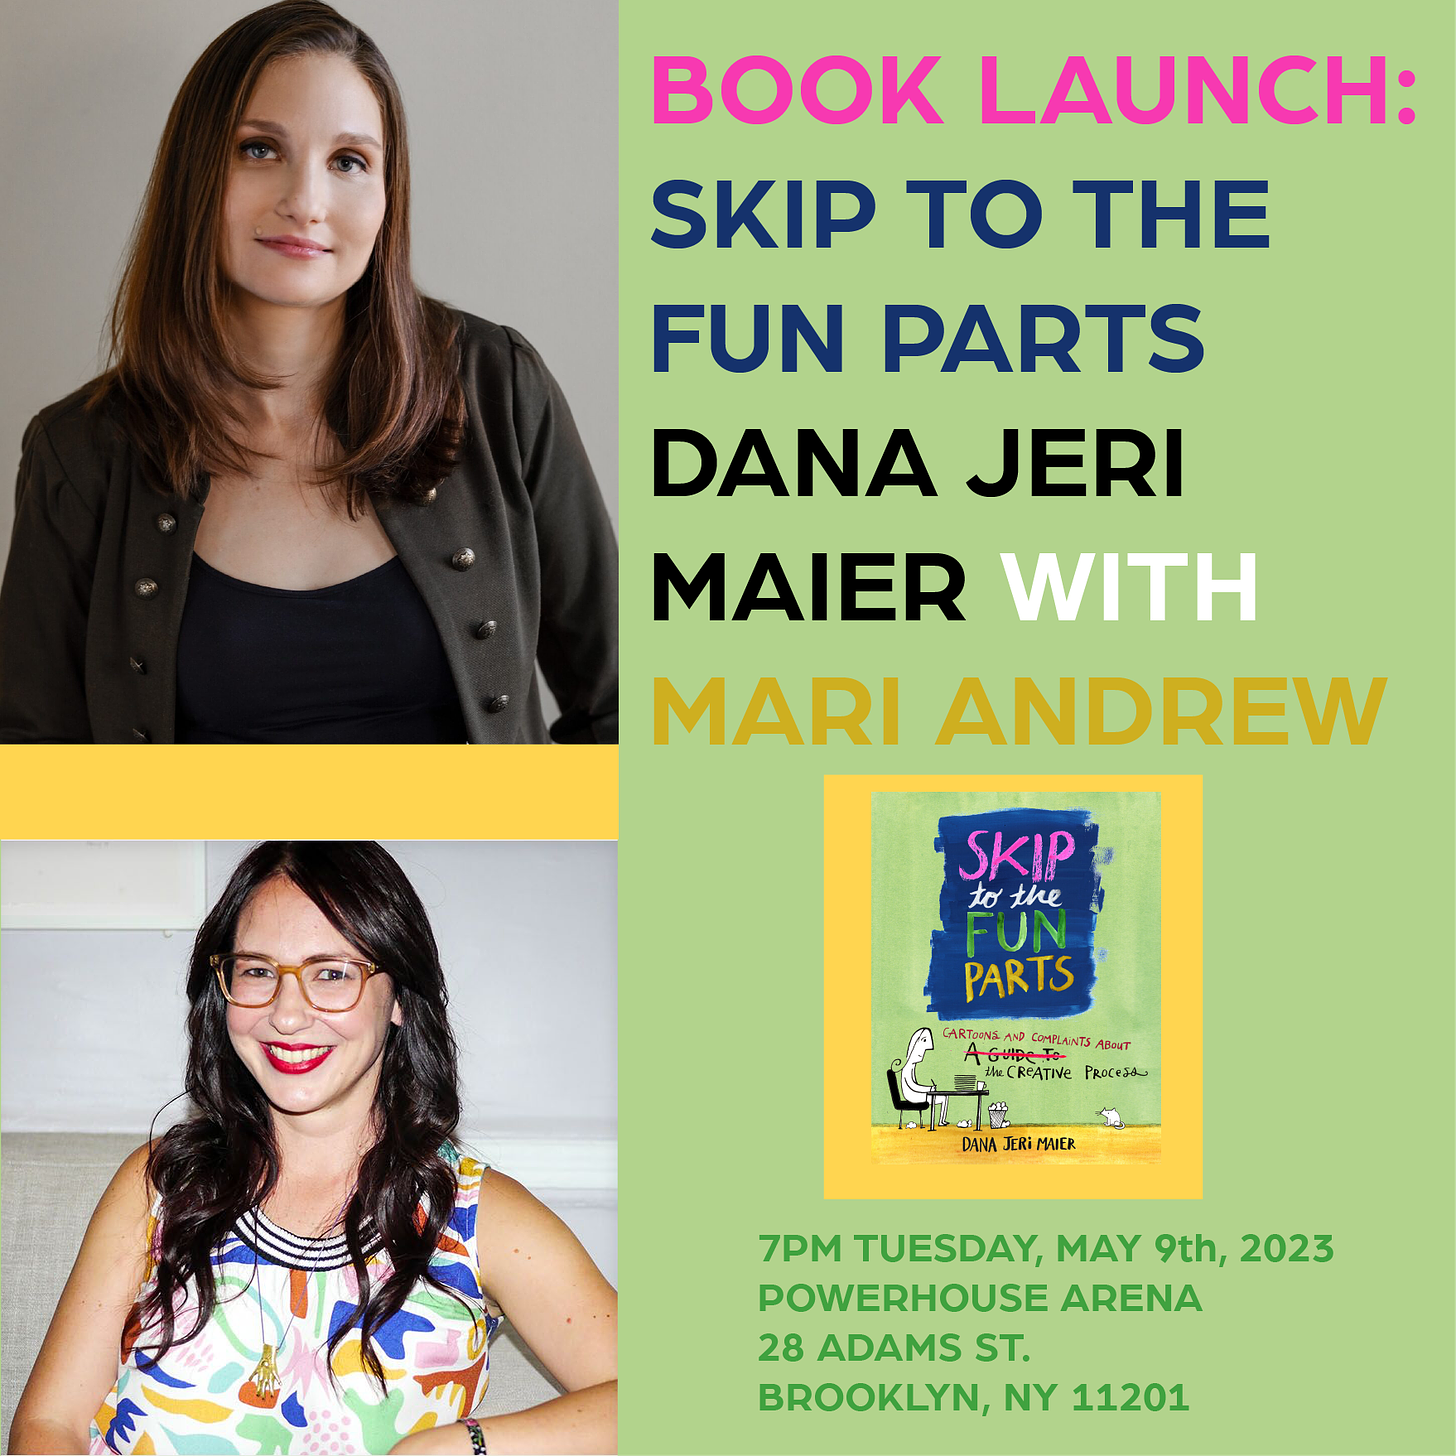 Book Launch: Skip to the Fun Parts by Dana Jeri Maier in conversation with Mari Andrew